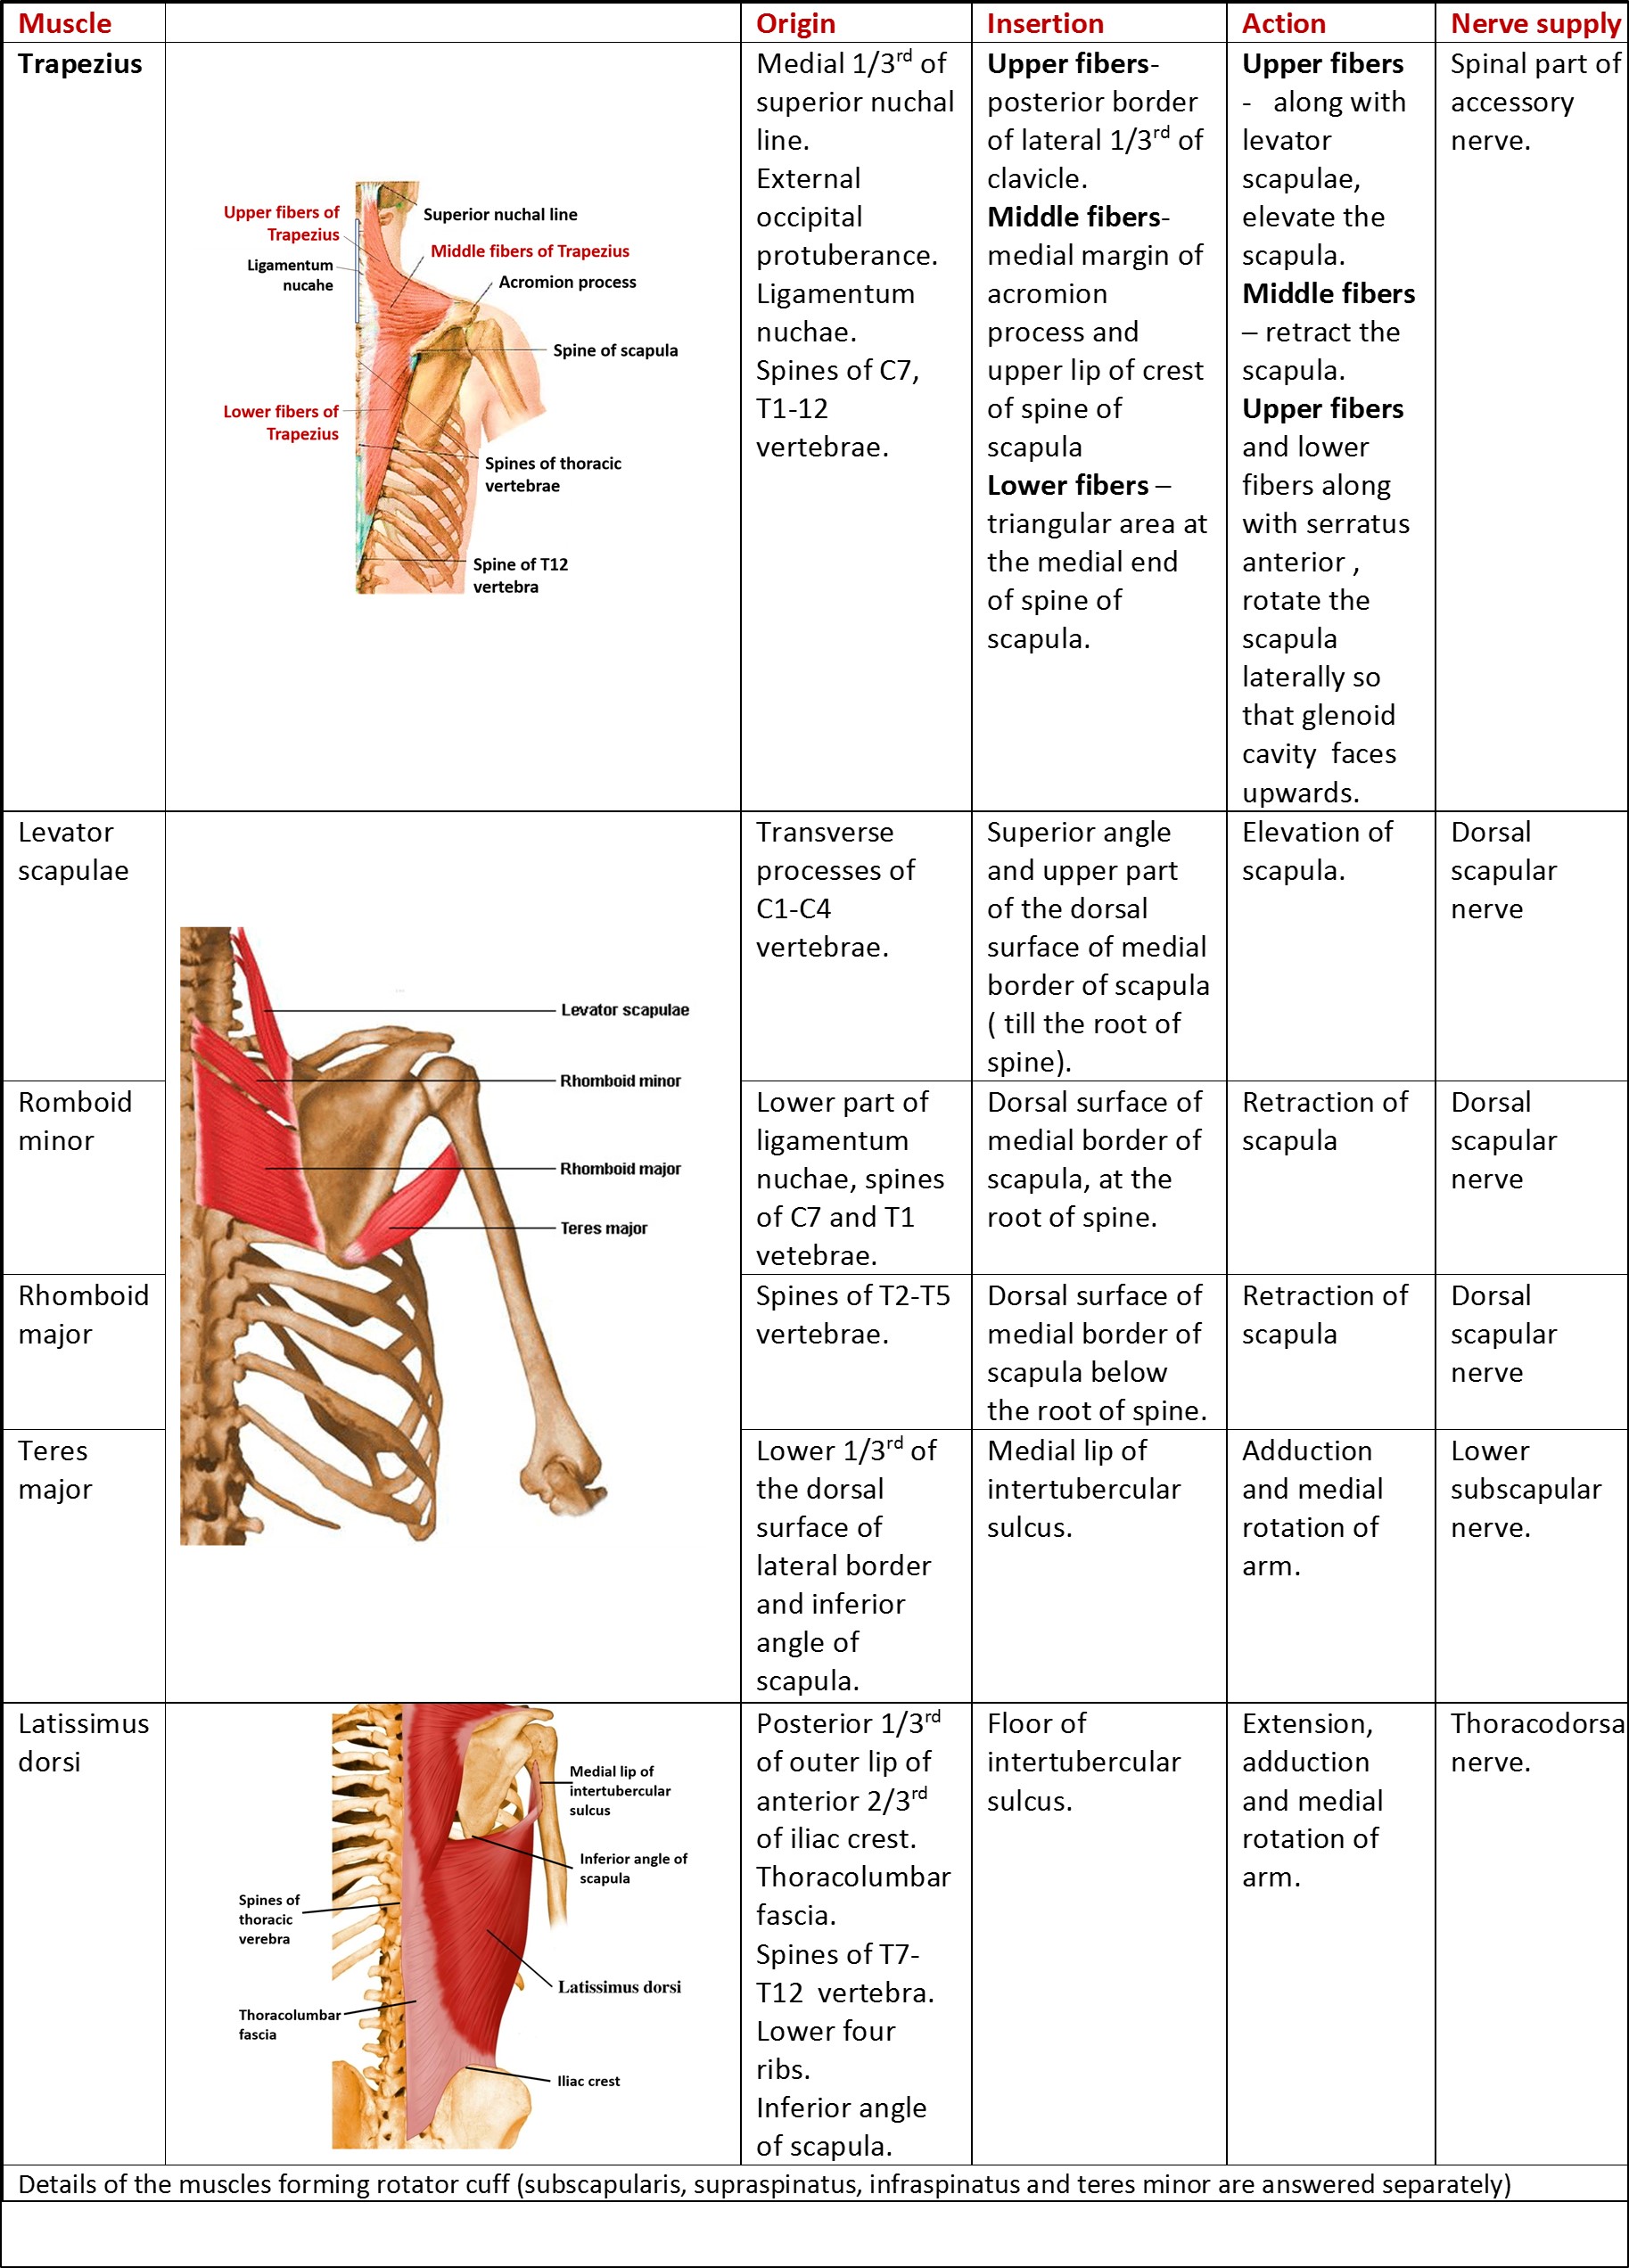 muscles of scapular region - origin,insertion,action and nerve supply